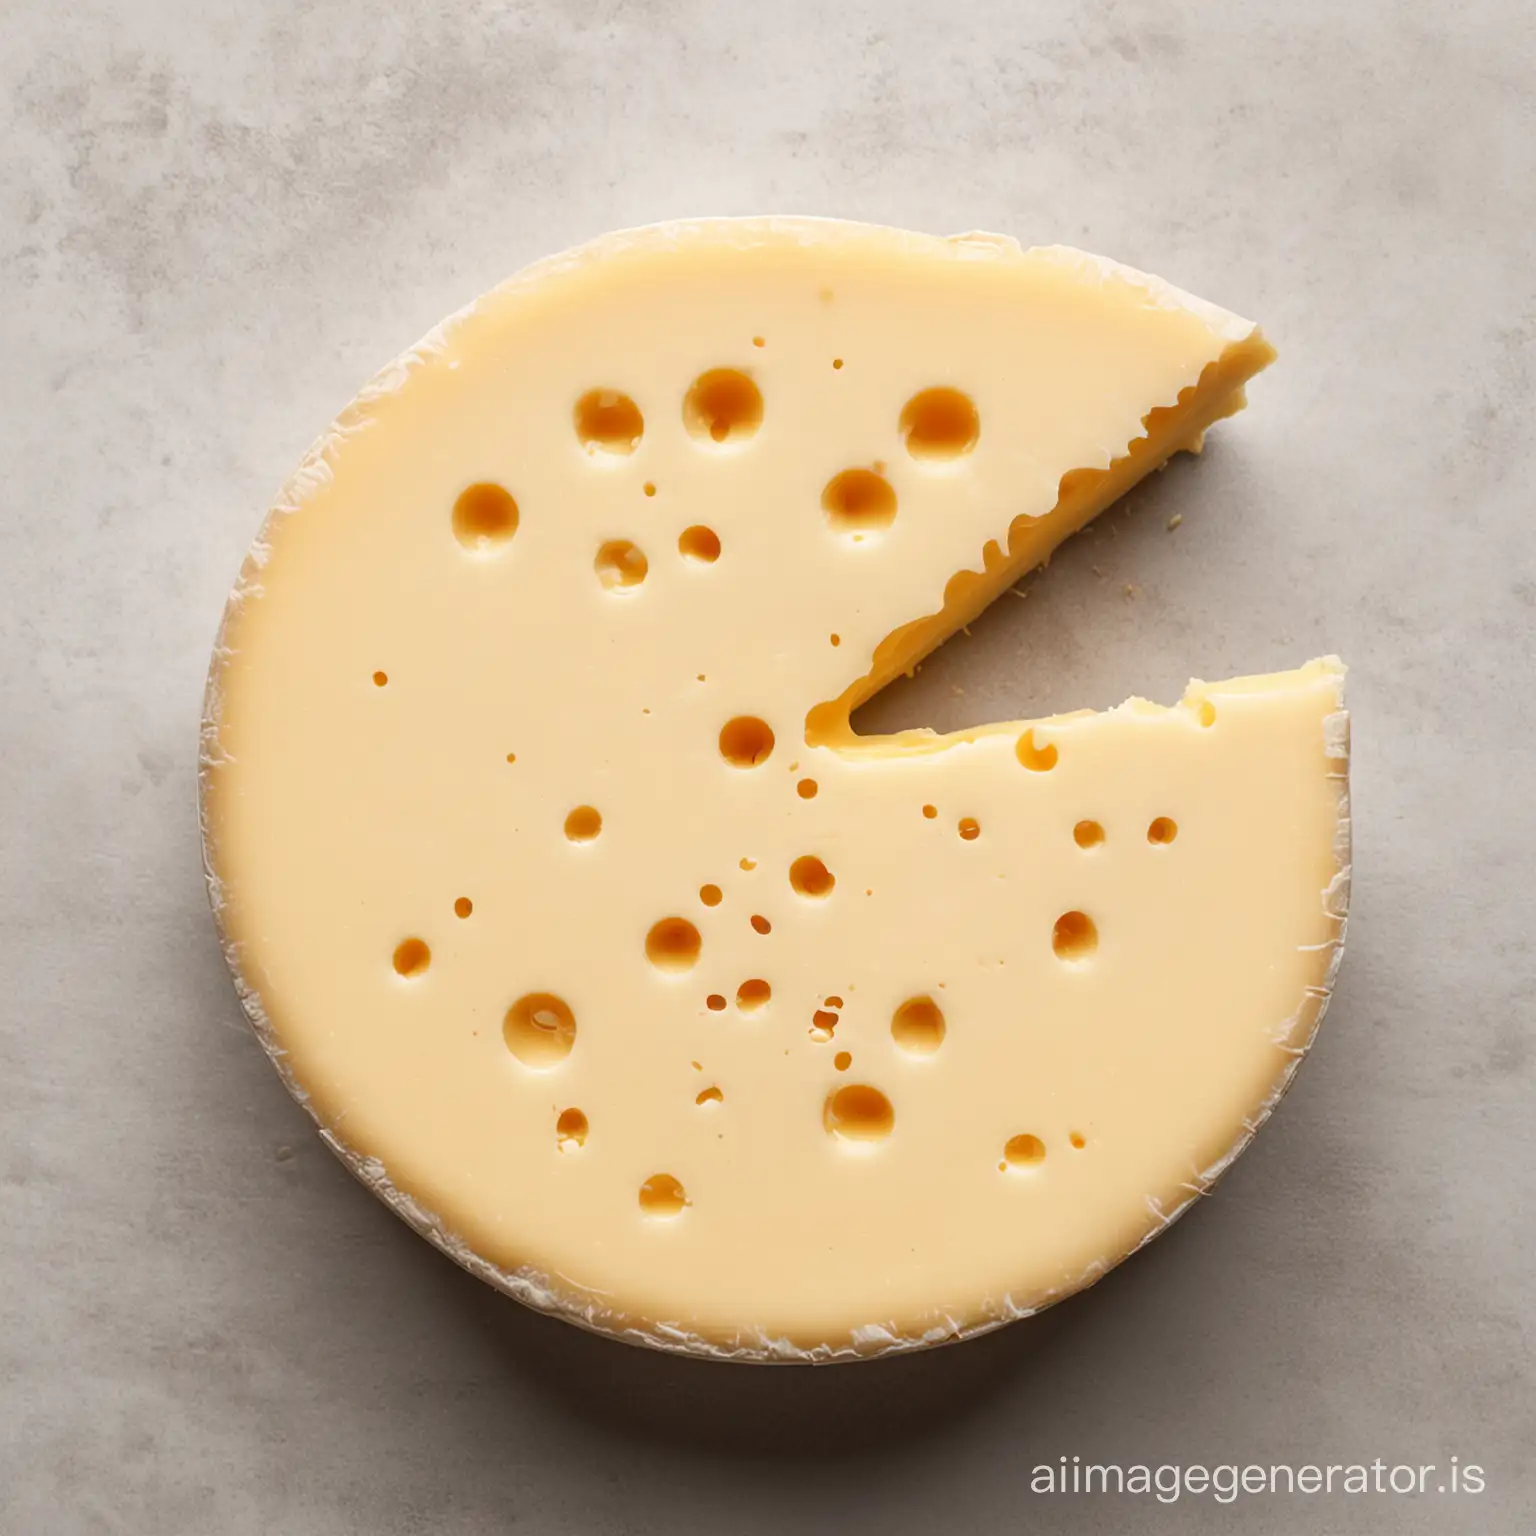 Cheese-Lovers-Delight-Vibrant-Yellow-Cheese-on-White-Background